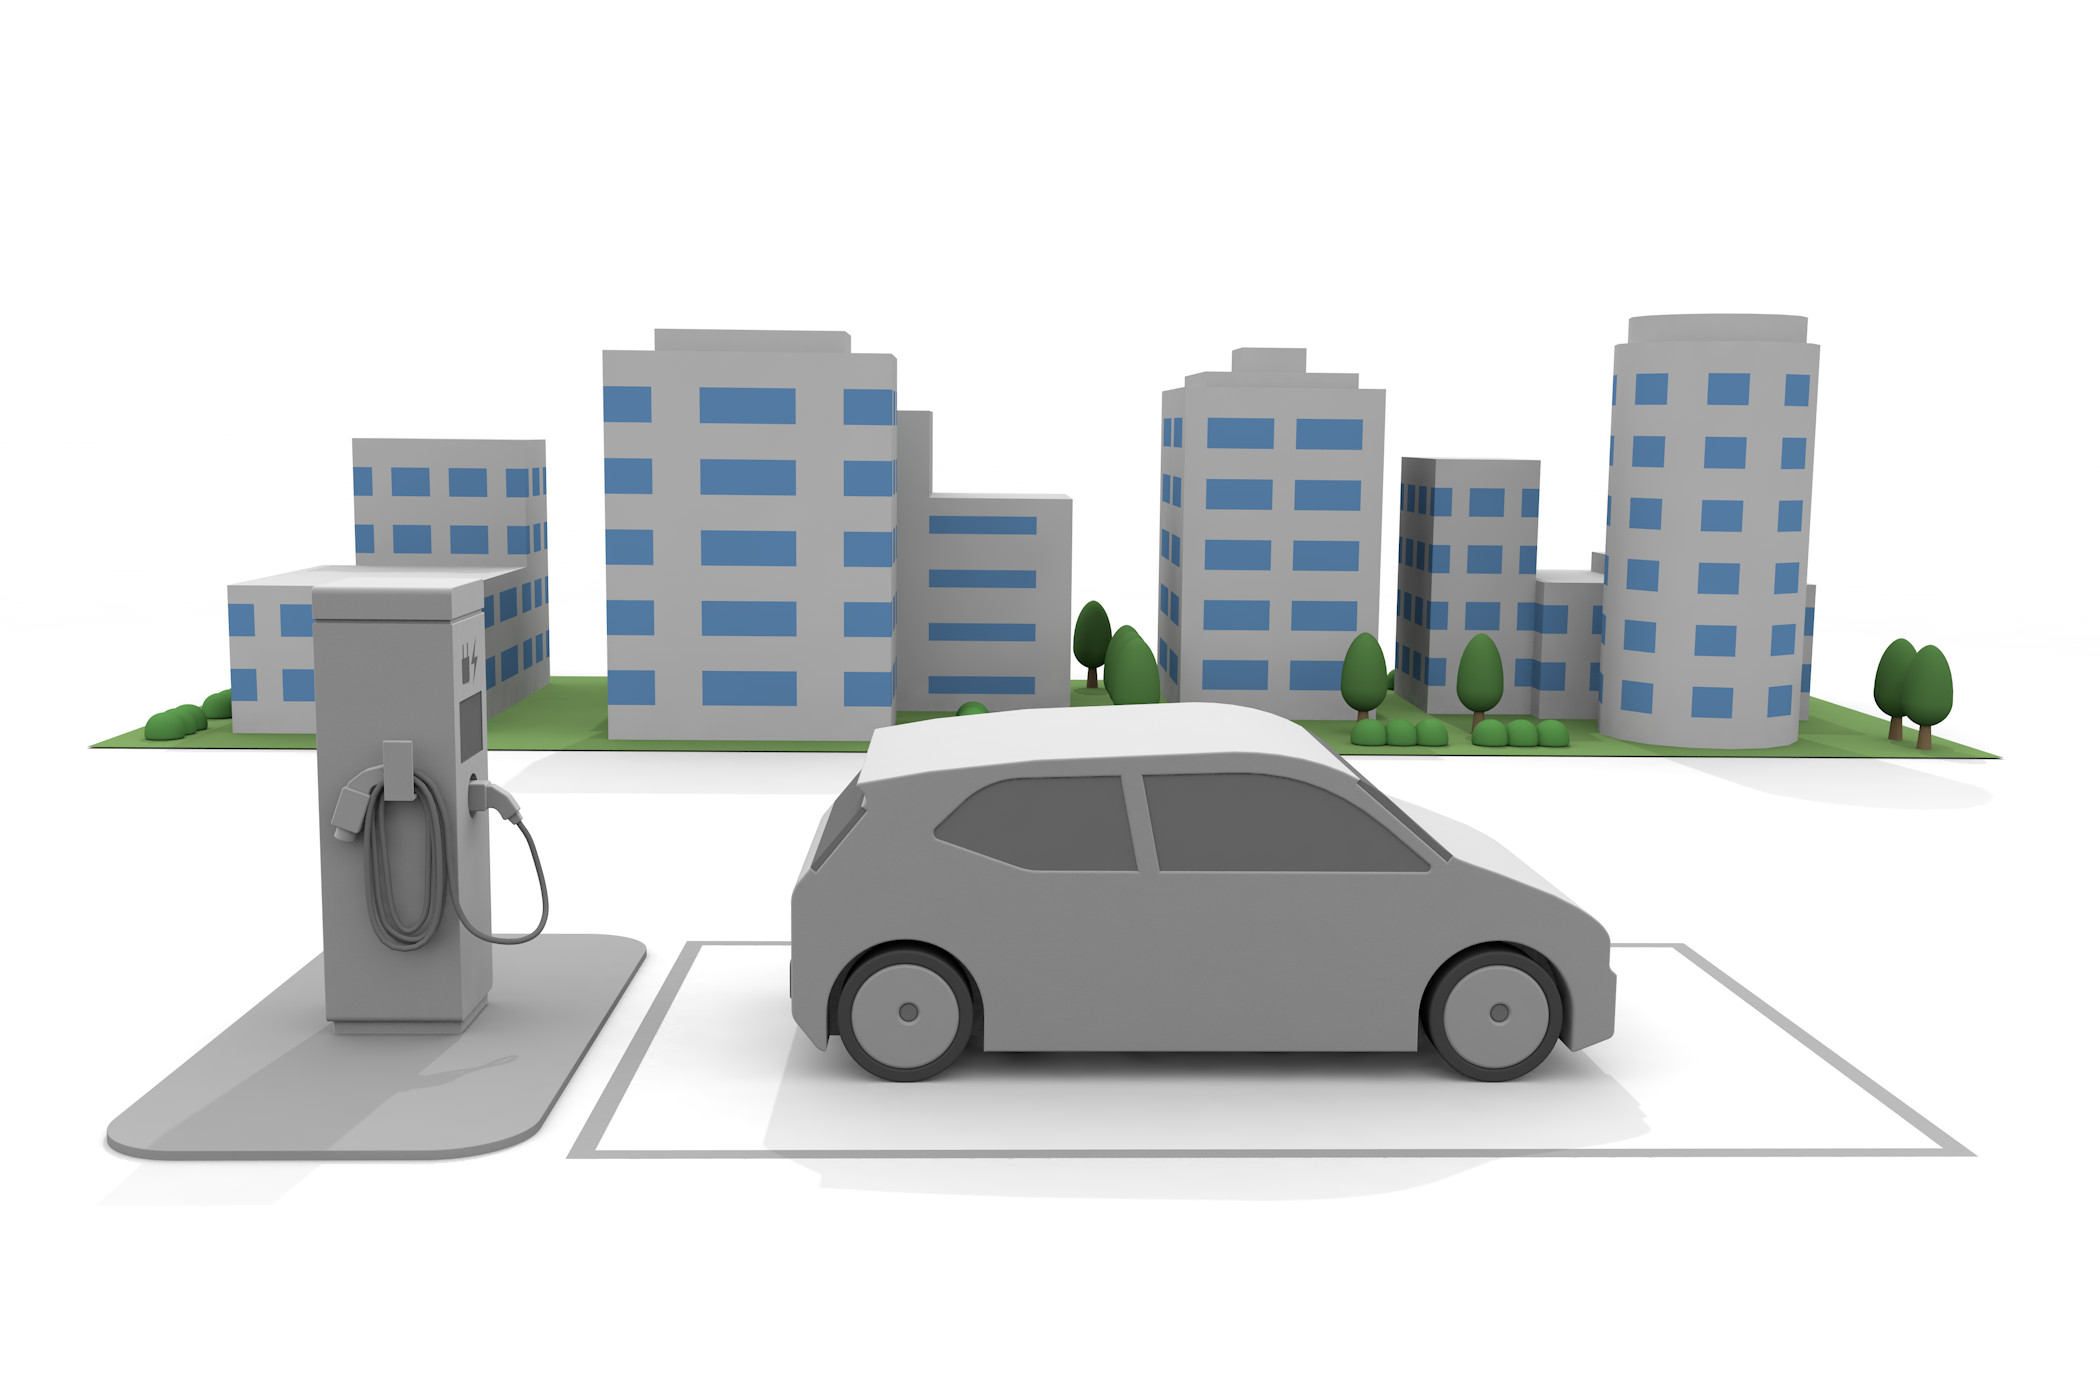 Eco Car / Eco / Car / Station / Battery-Illustration / 3D Rendering / Free Material / Commercial Use OK